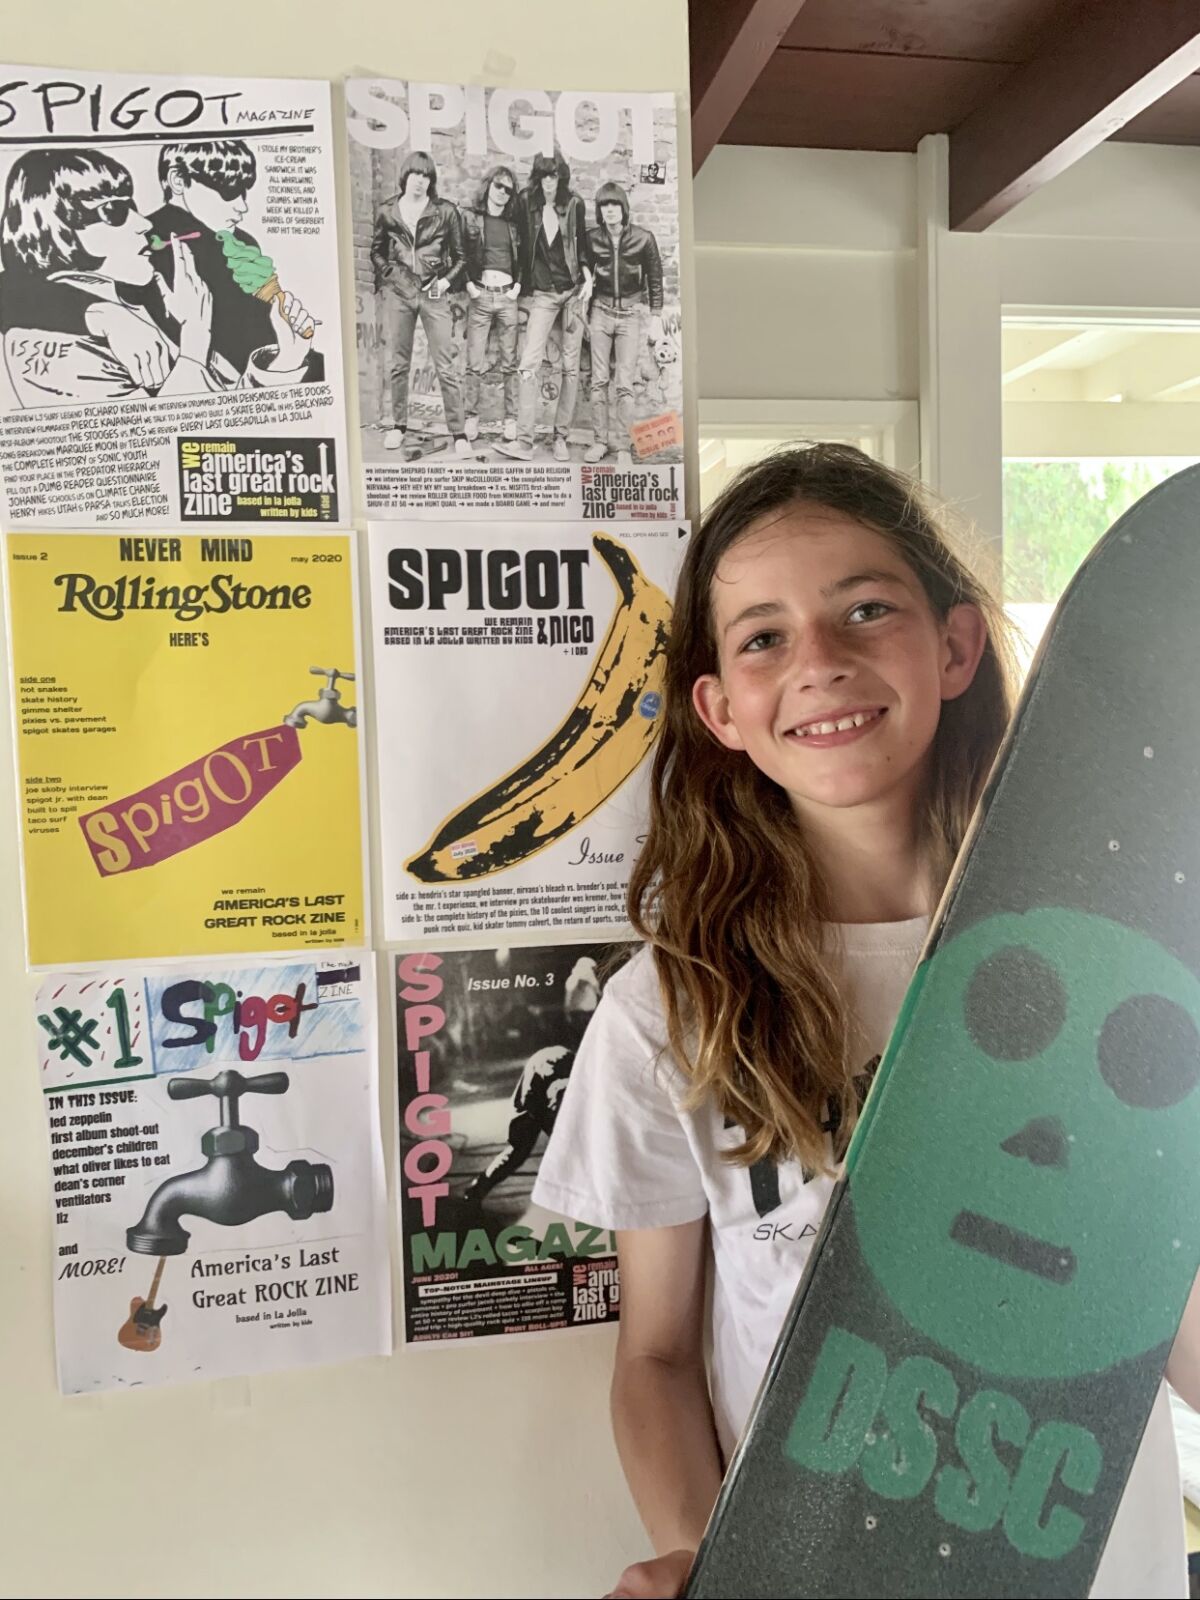 Lucas Leaverton, 12, loves to skateboard and has started two enterprises to spread the word.